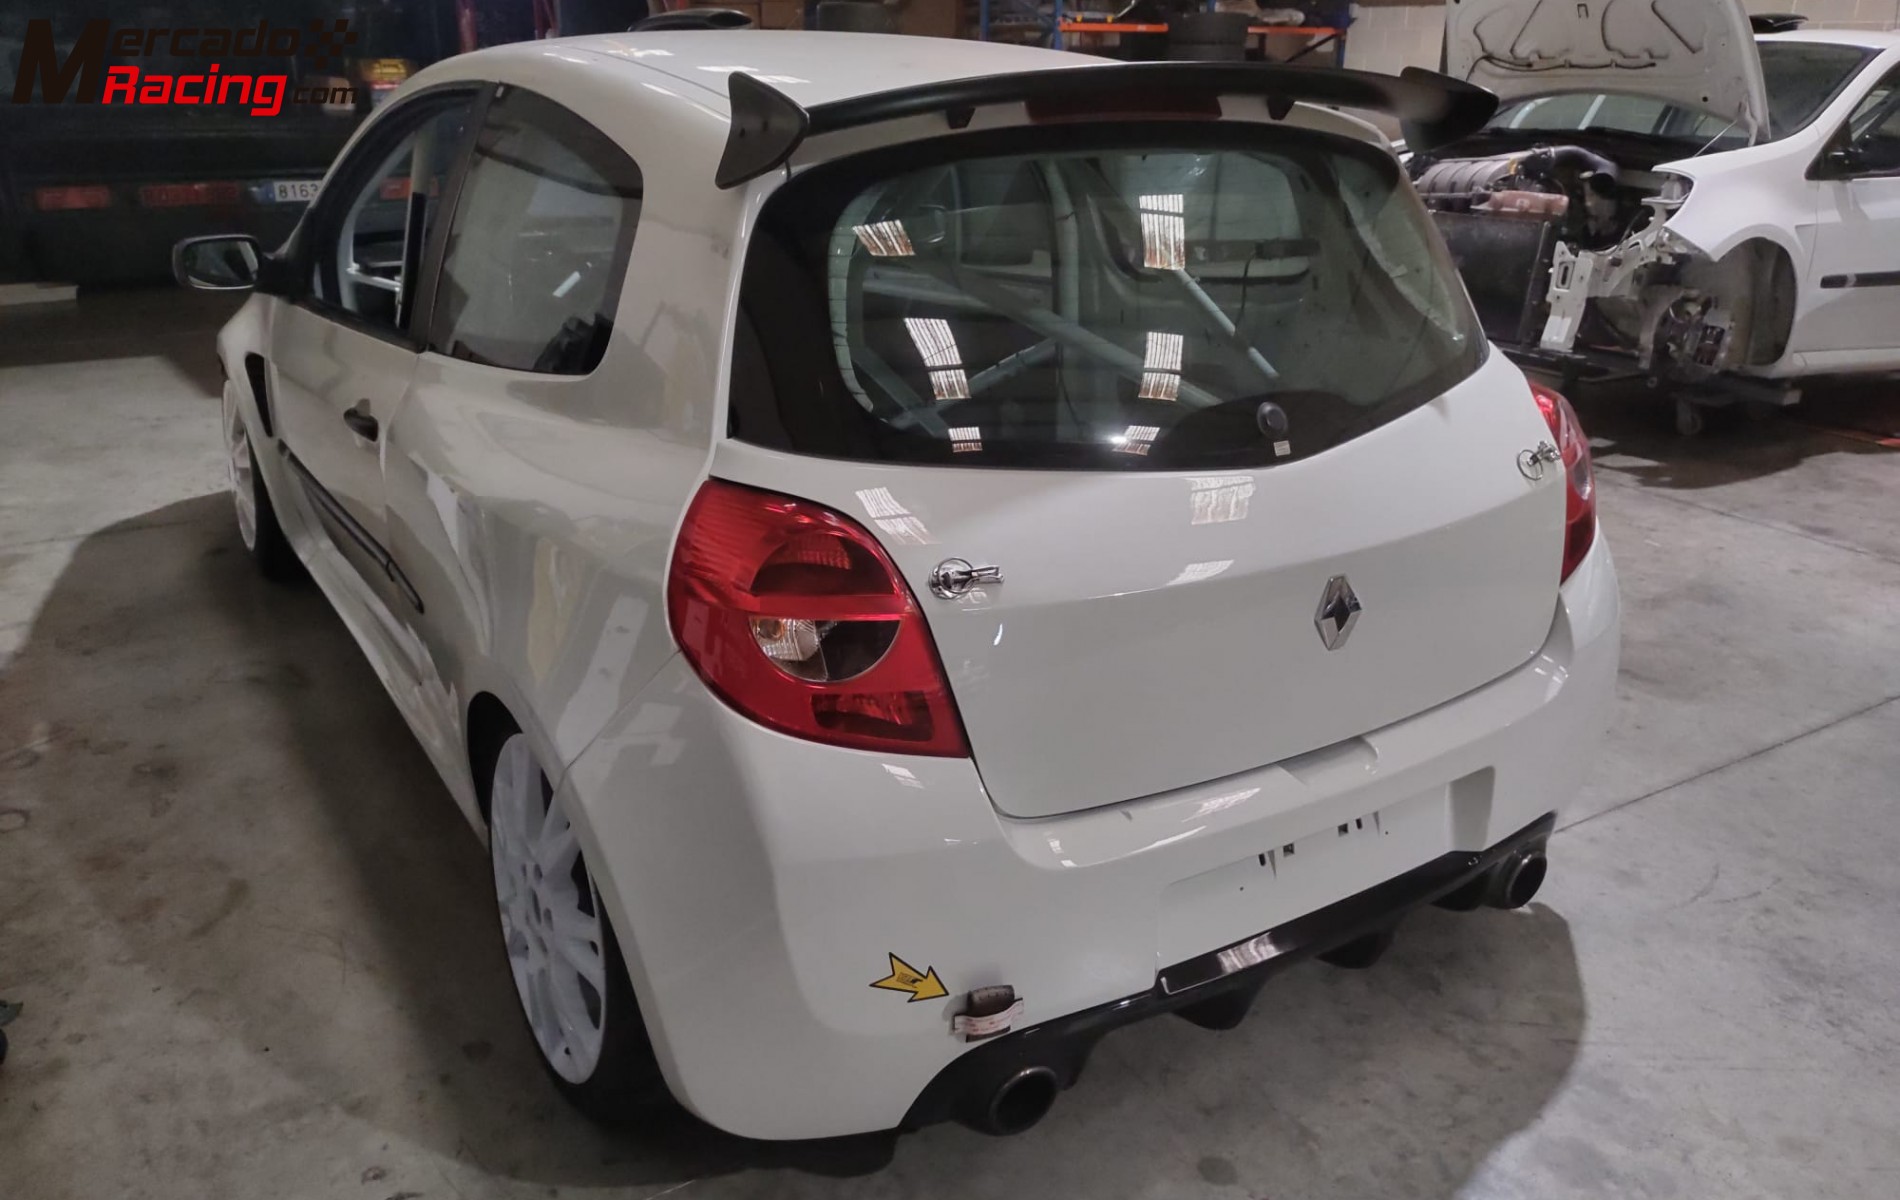 Renault clio cup iii